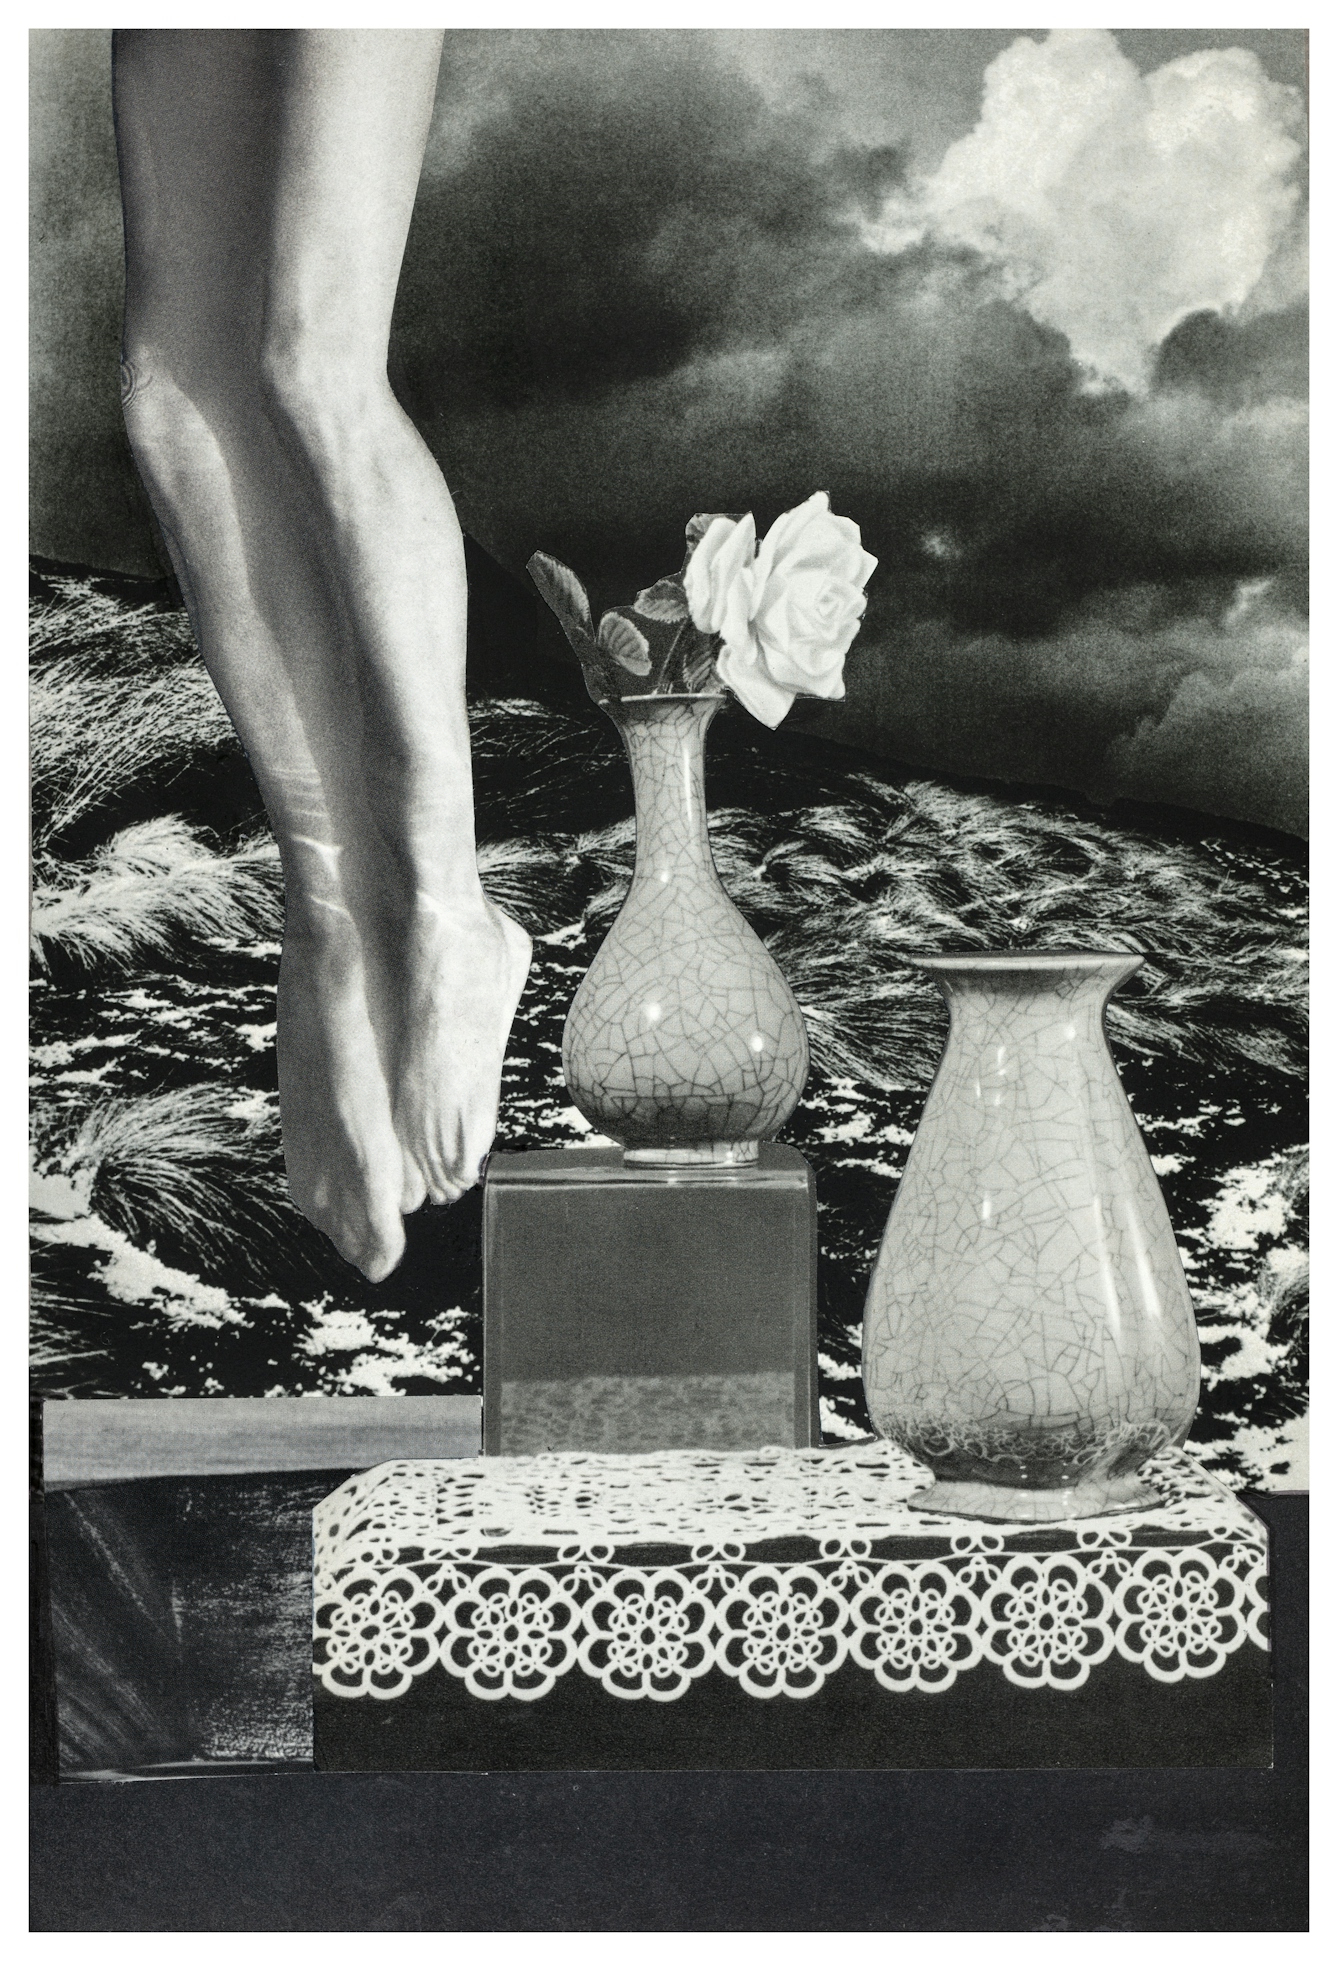 Photographic collage using images cut out from magazines and books. The scene depicts a pair of naked legs from the thigh down to the toes appearing from the top left hand corner. Next to the legs are 2 vases resting on a square plinth and a crocheted table cloth. One vase has a white rose in it, the other is empty. The background of the scene is a wind swept sand dune landscape against a heavy cloudy skyline. The overall tones of the collage are monotone, blacks, whites and greys.